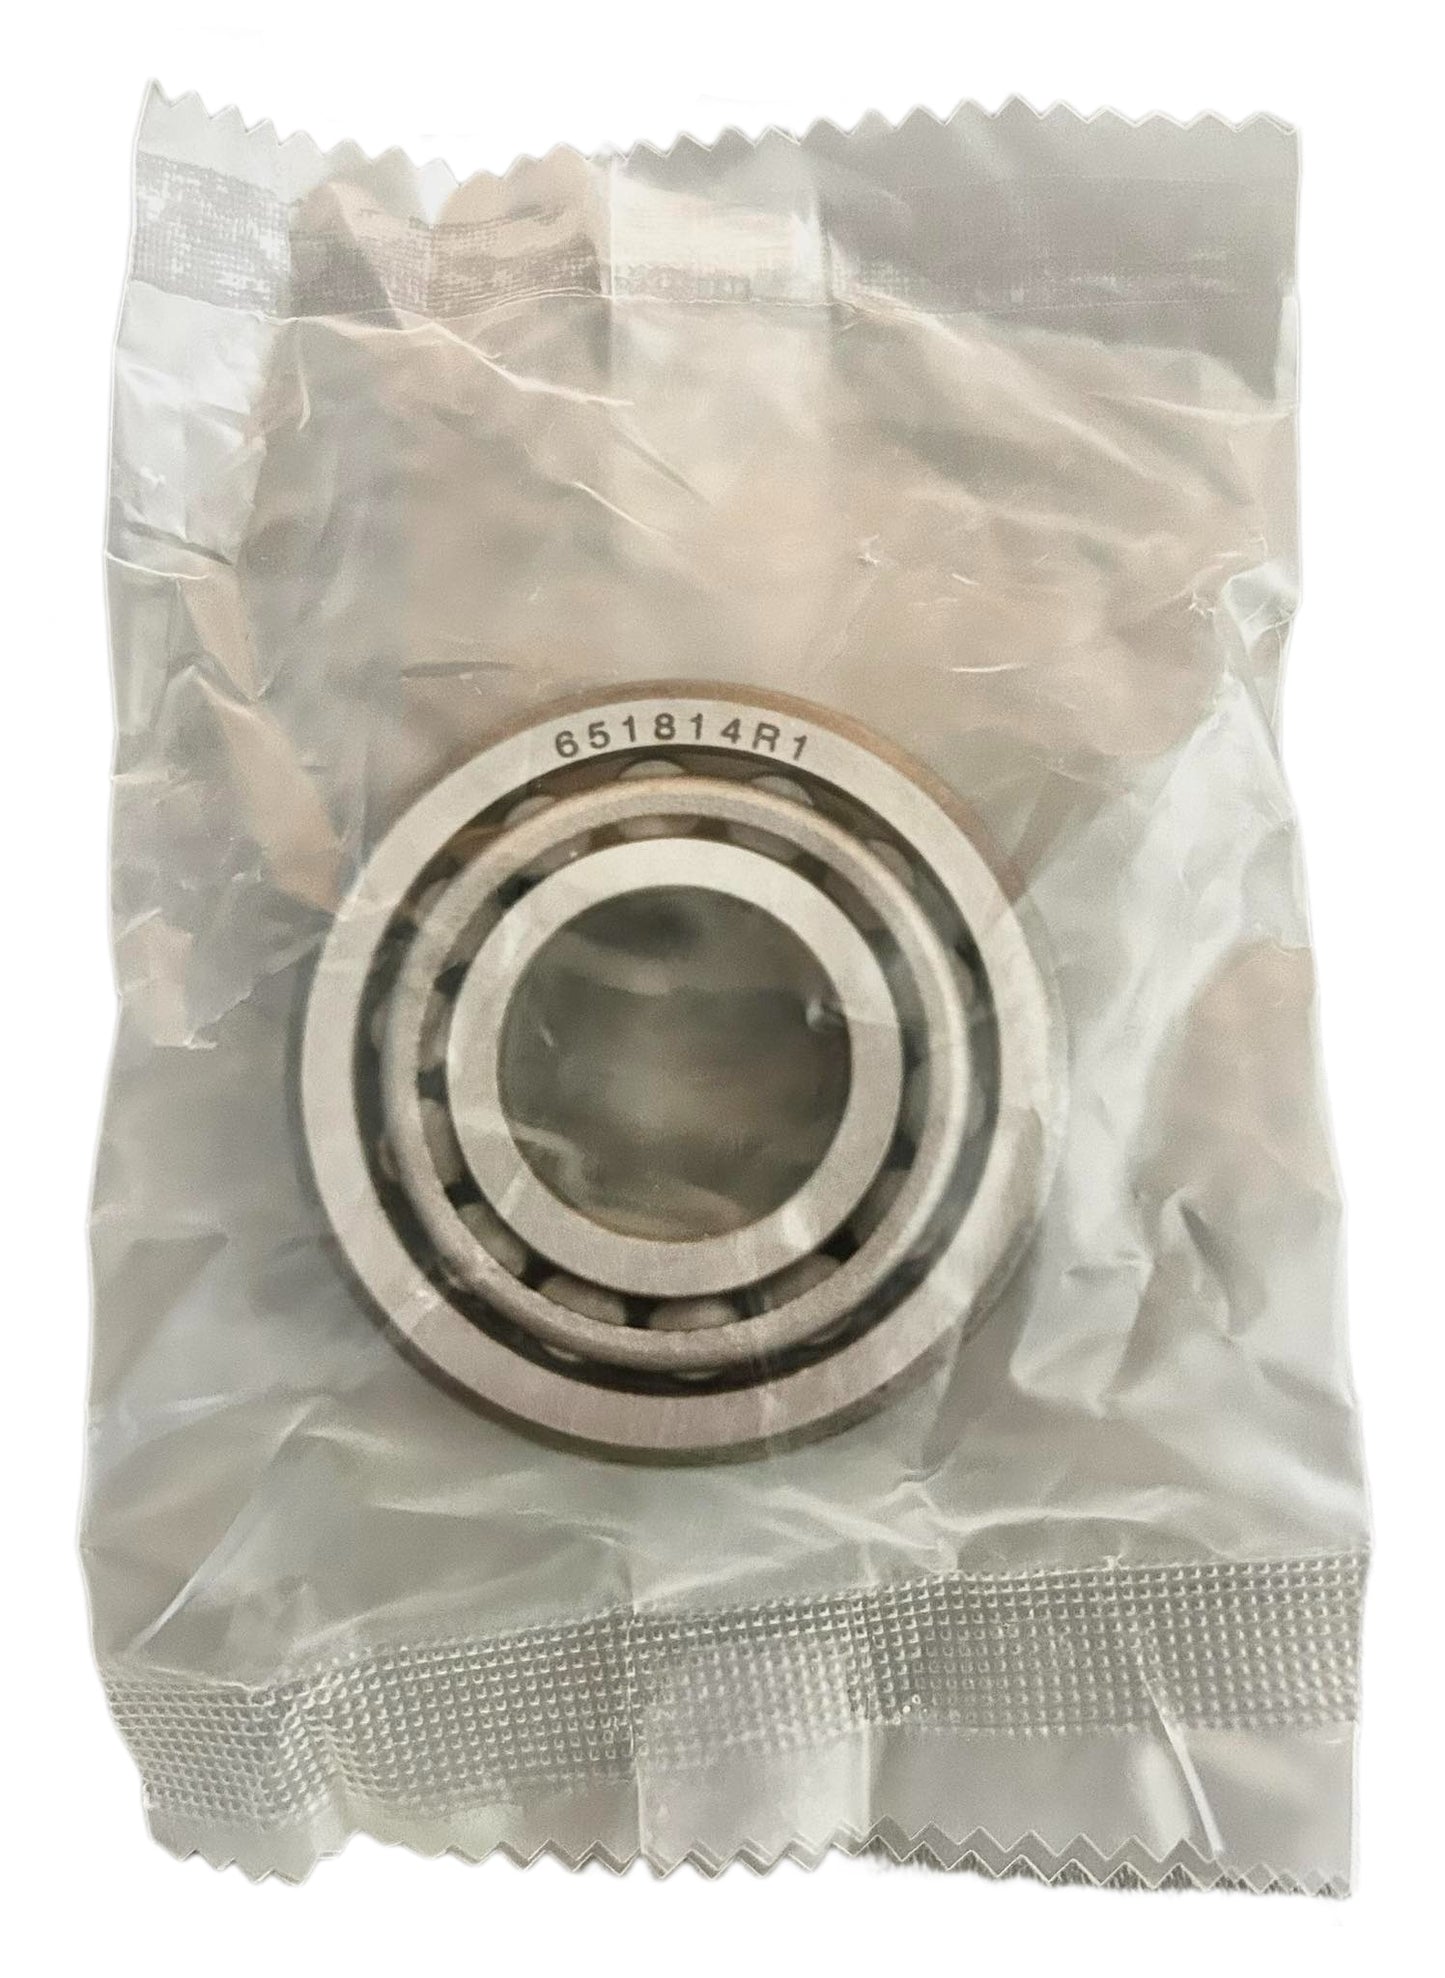 Tapered Roller Bearing Set 651814R1, 651815R91, LM11949, LM11910